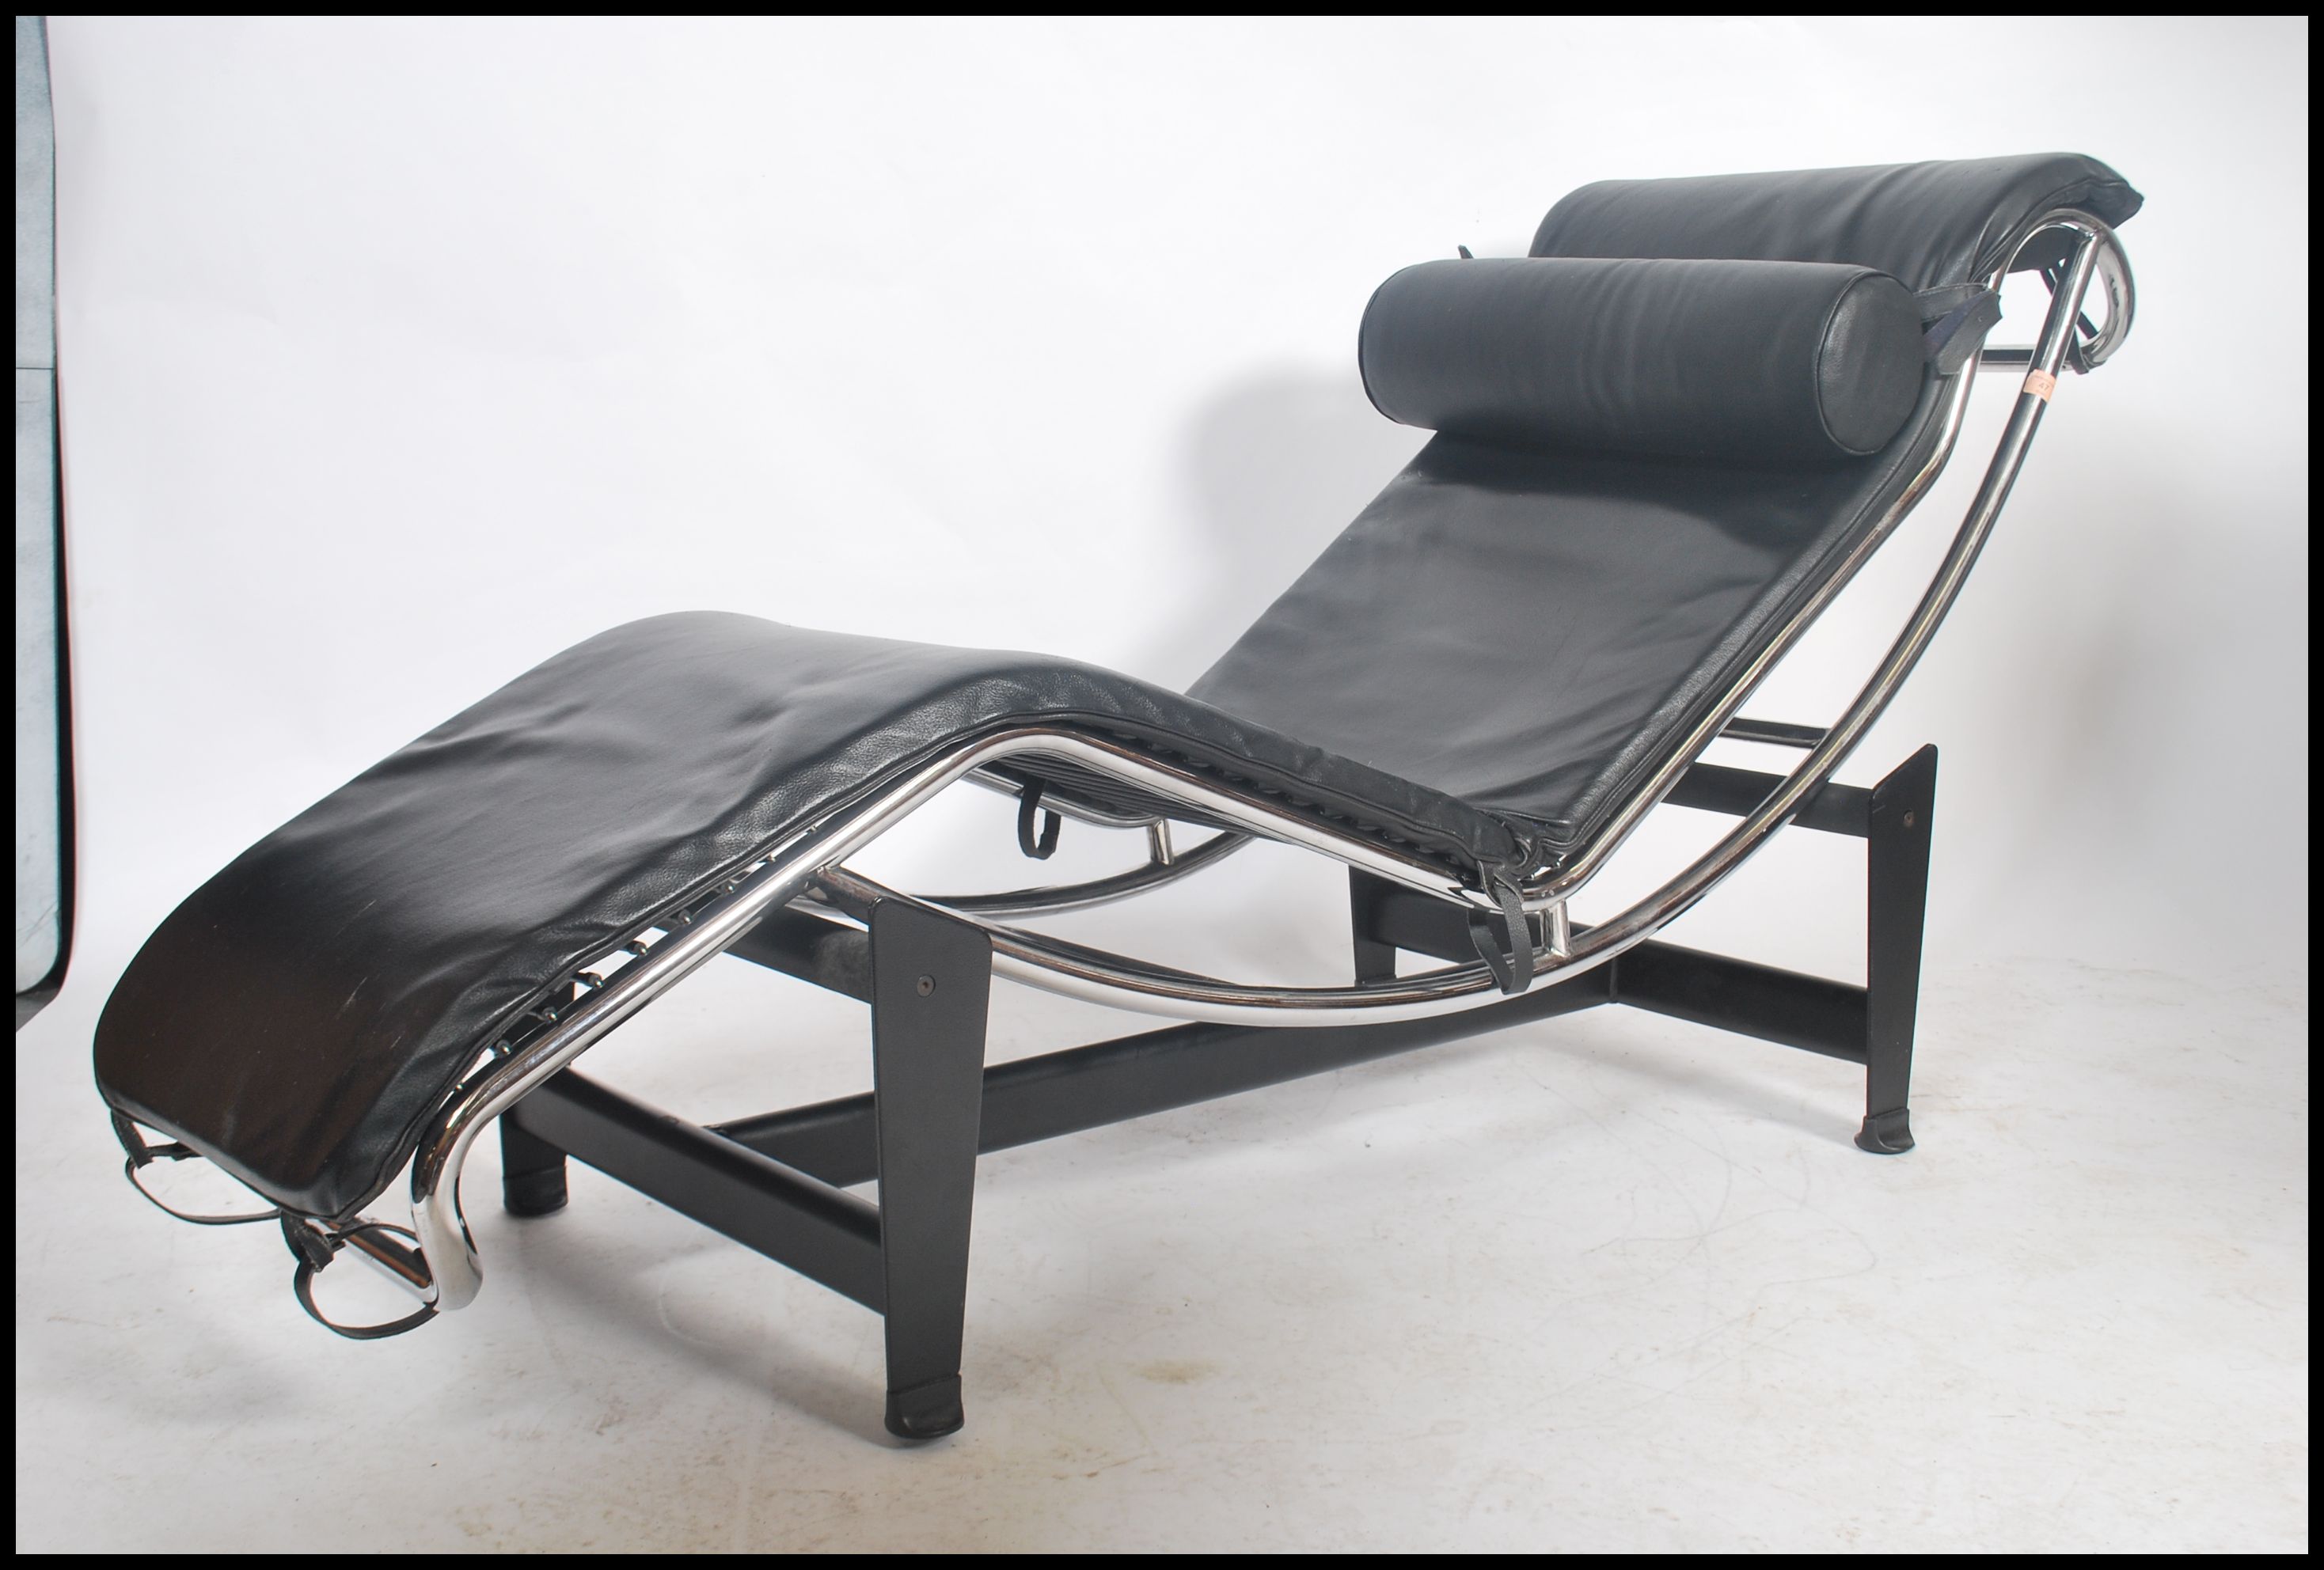 After Le Corbusier LC4 chaise lounge day bed with black leather upholstery and barrel cushion set